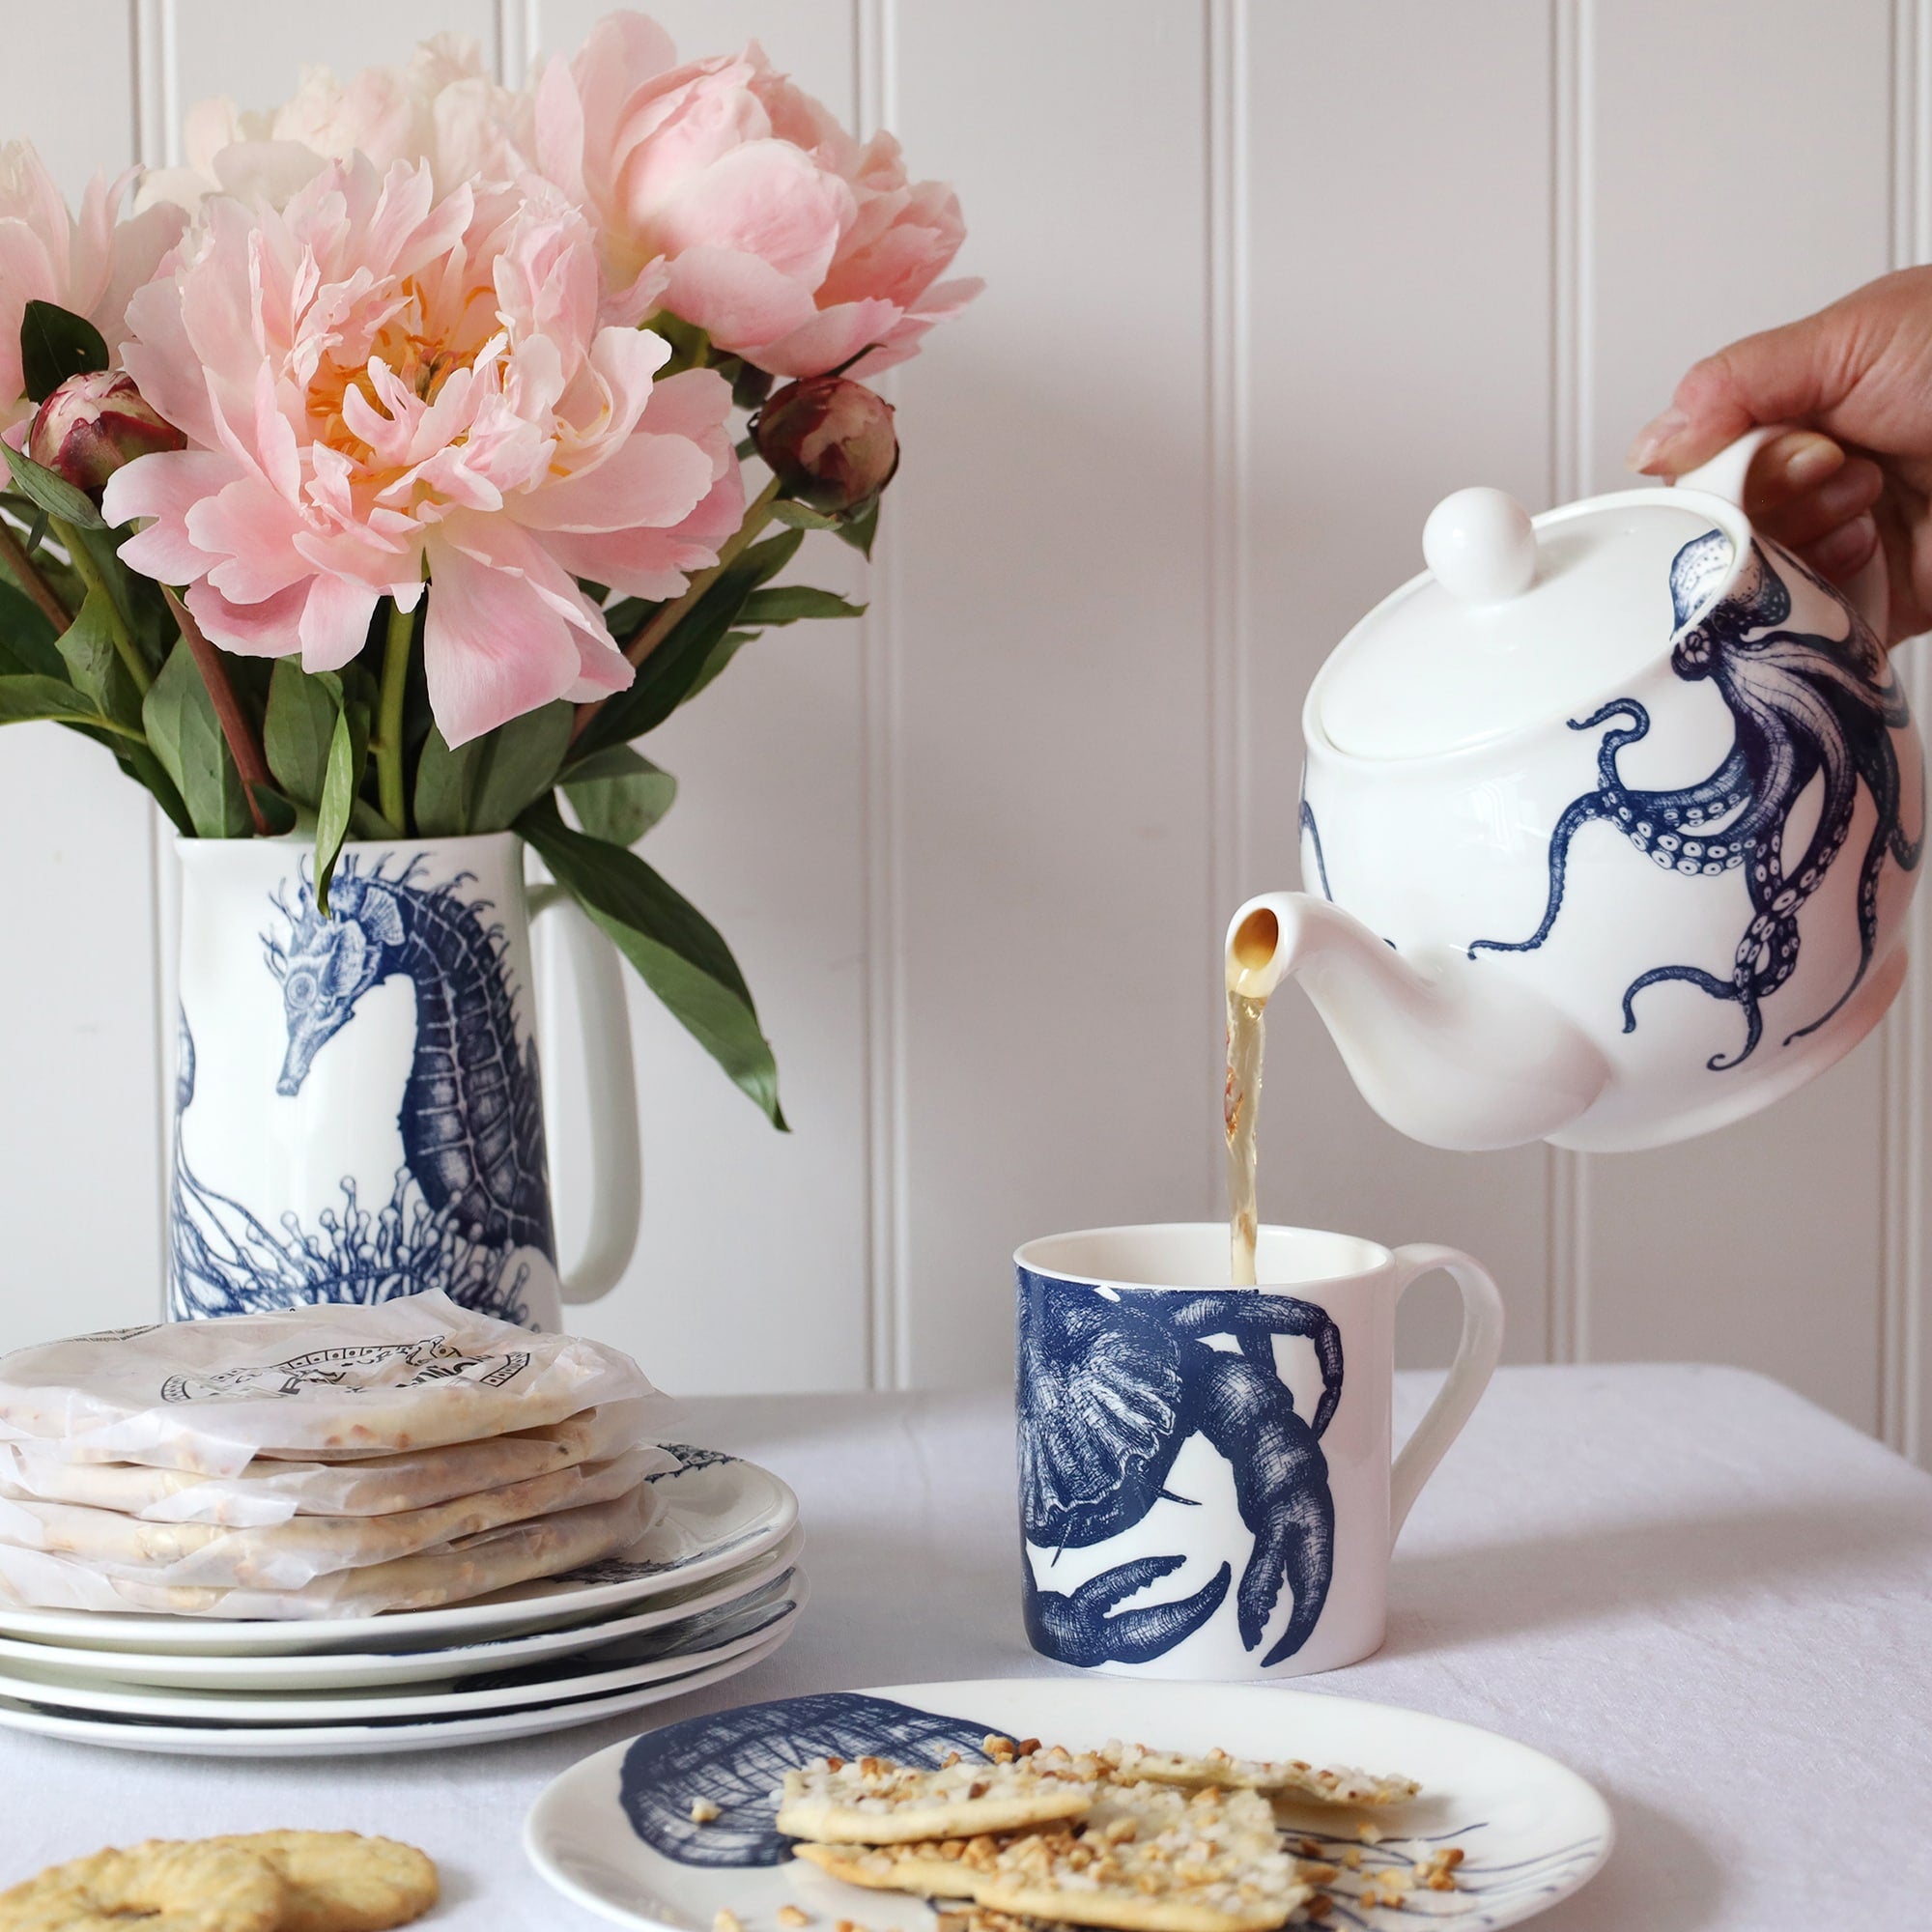 A blue & white informal; table setting set against a white shiplap wall and linen tablecloth. An octopus design adorns a teapot which is pouring tea into a white bone china mug decorated with a blue illustrated crab.